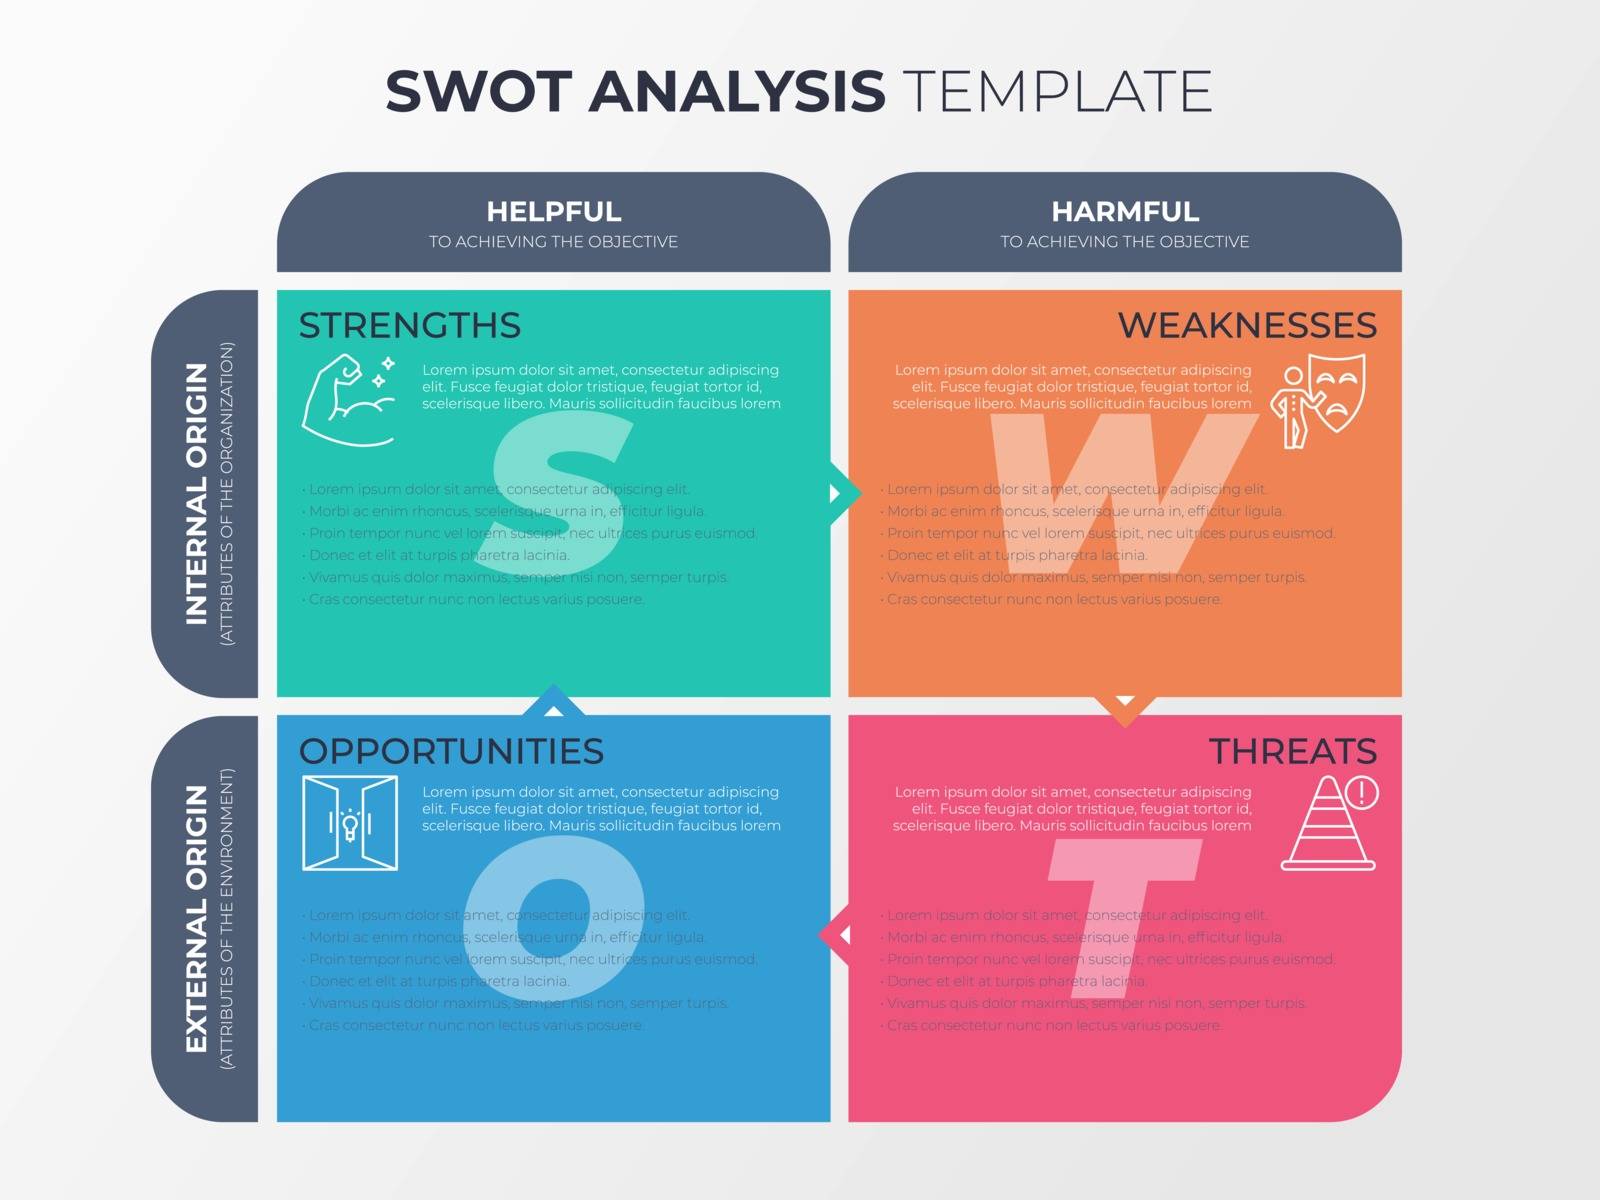 SWOT Analysis Template by nongpimmy